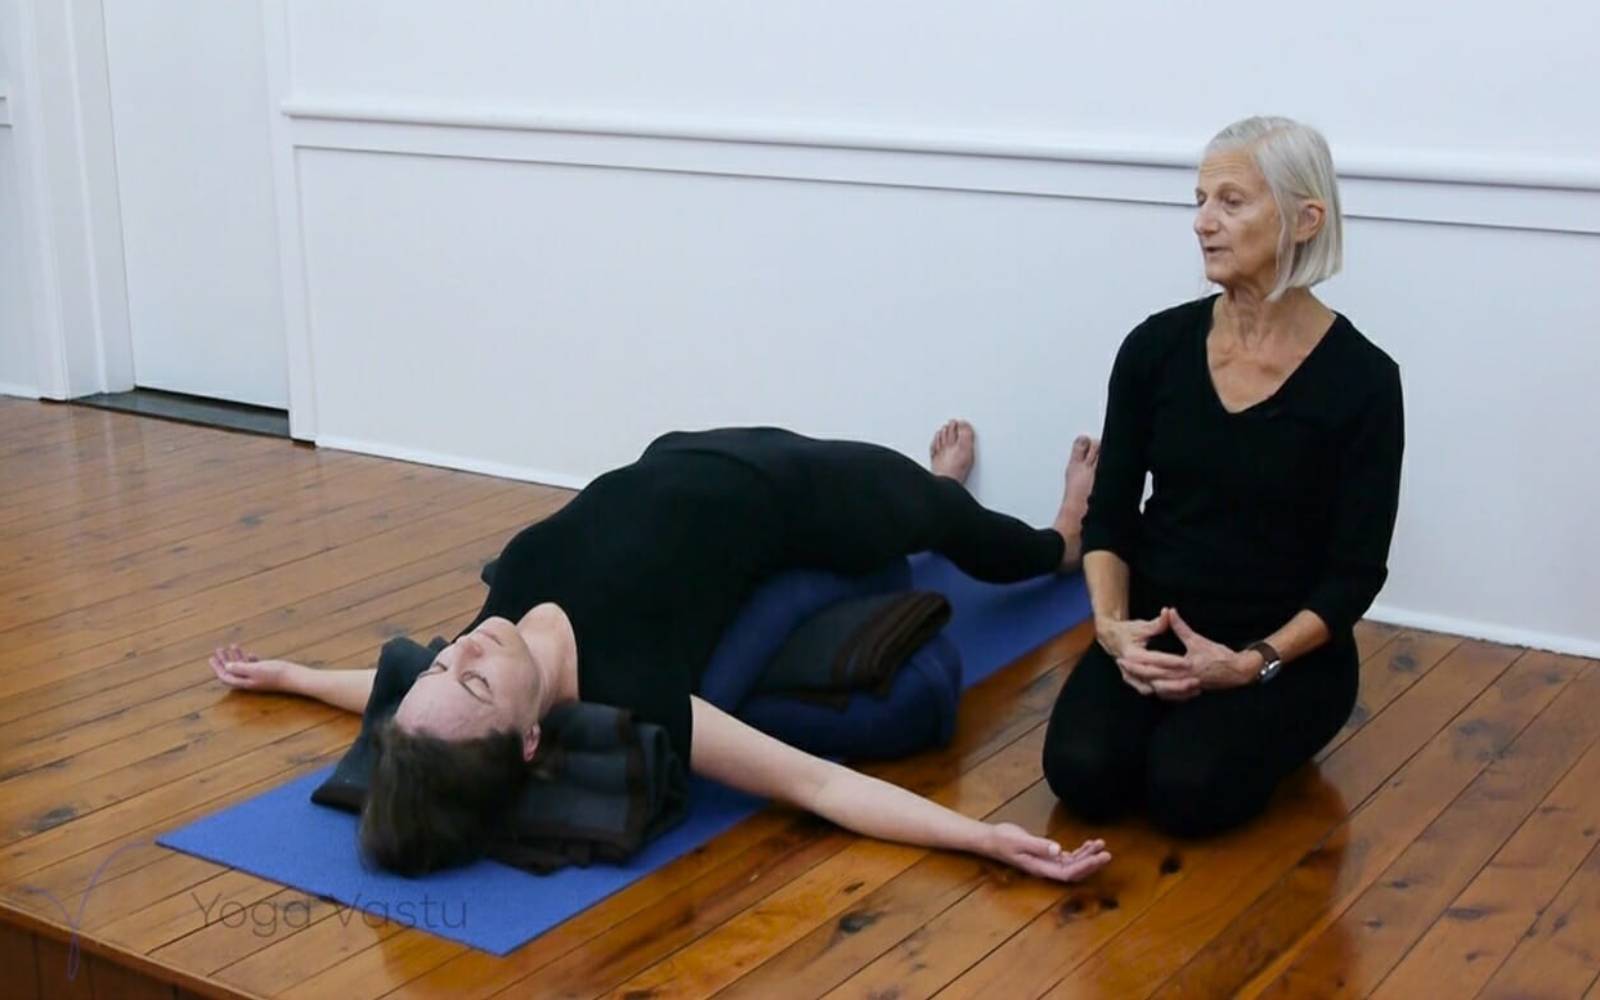 Featured Restorative Pose: Supported Bridge Pose - Yoga for Times of Change